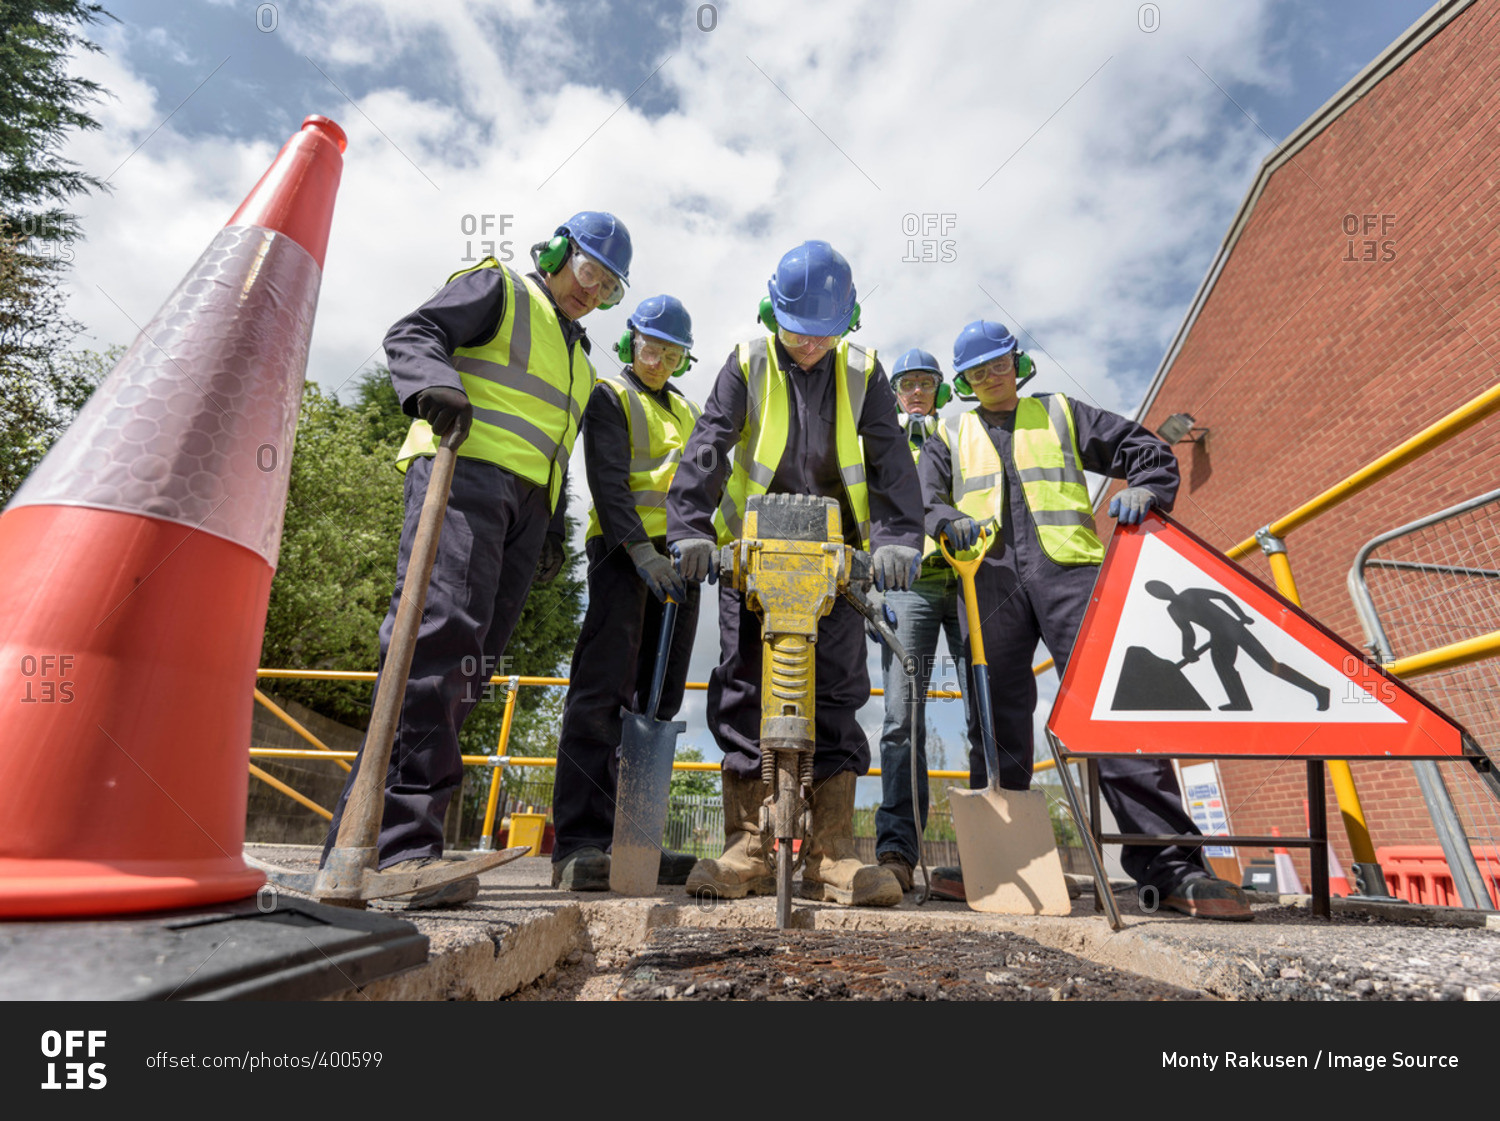 Apprentice builders training with pneumatic drill in training facility